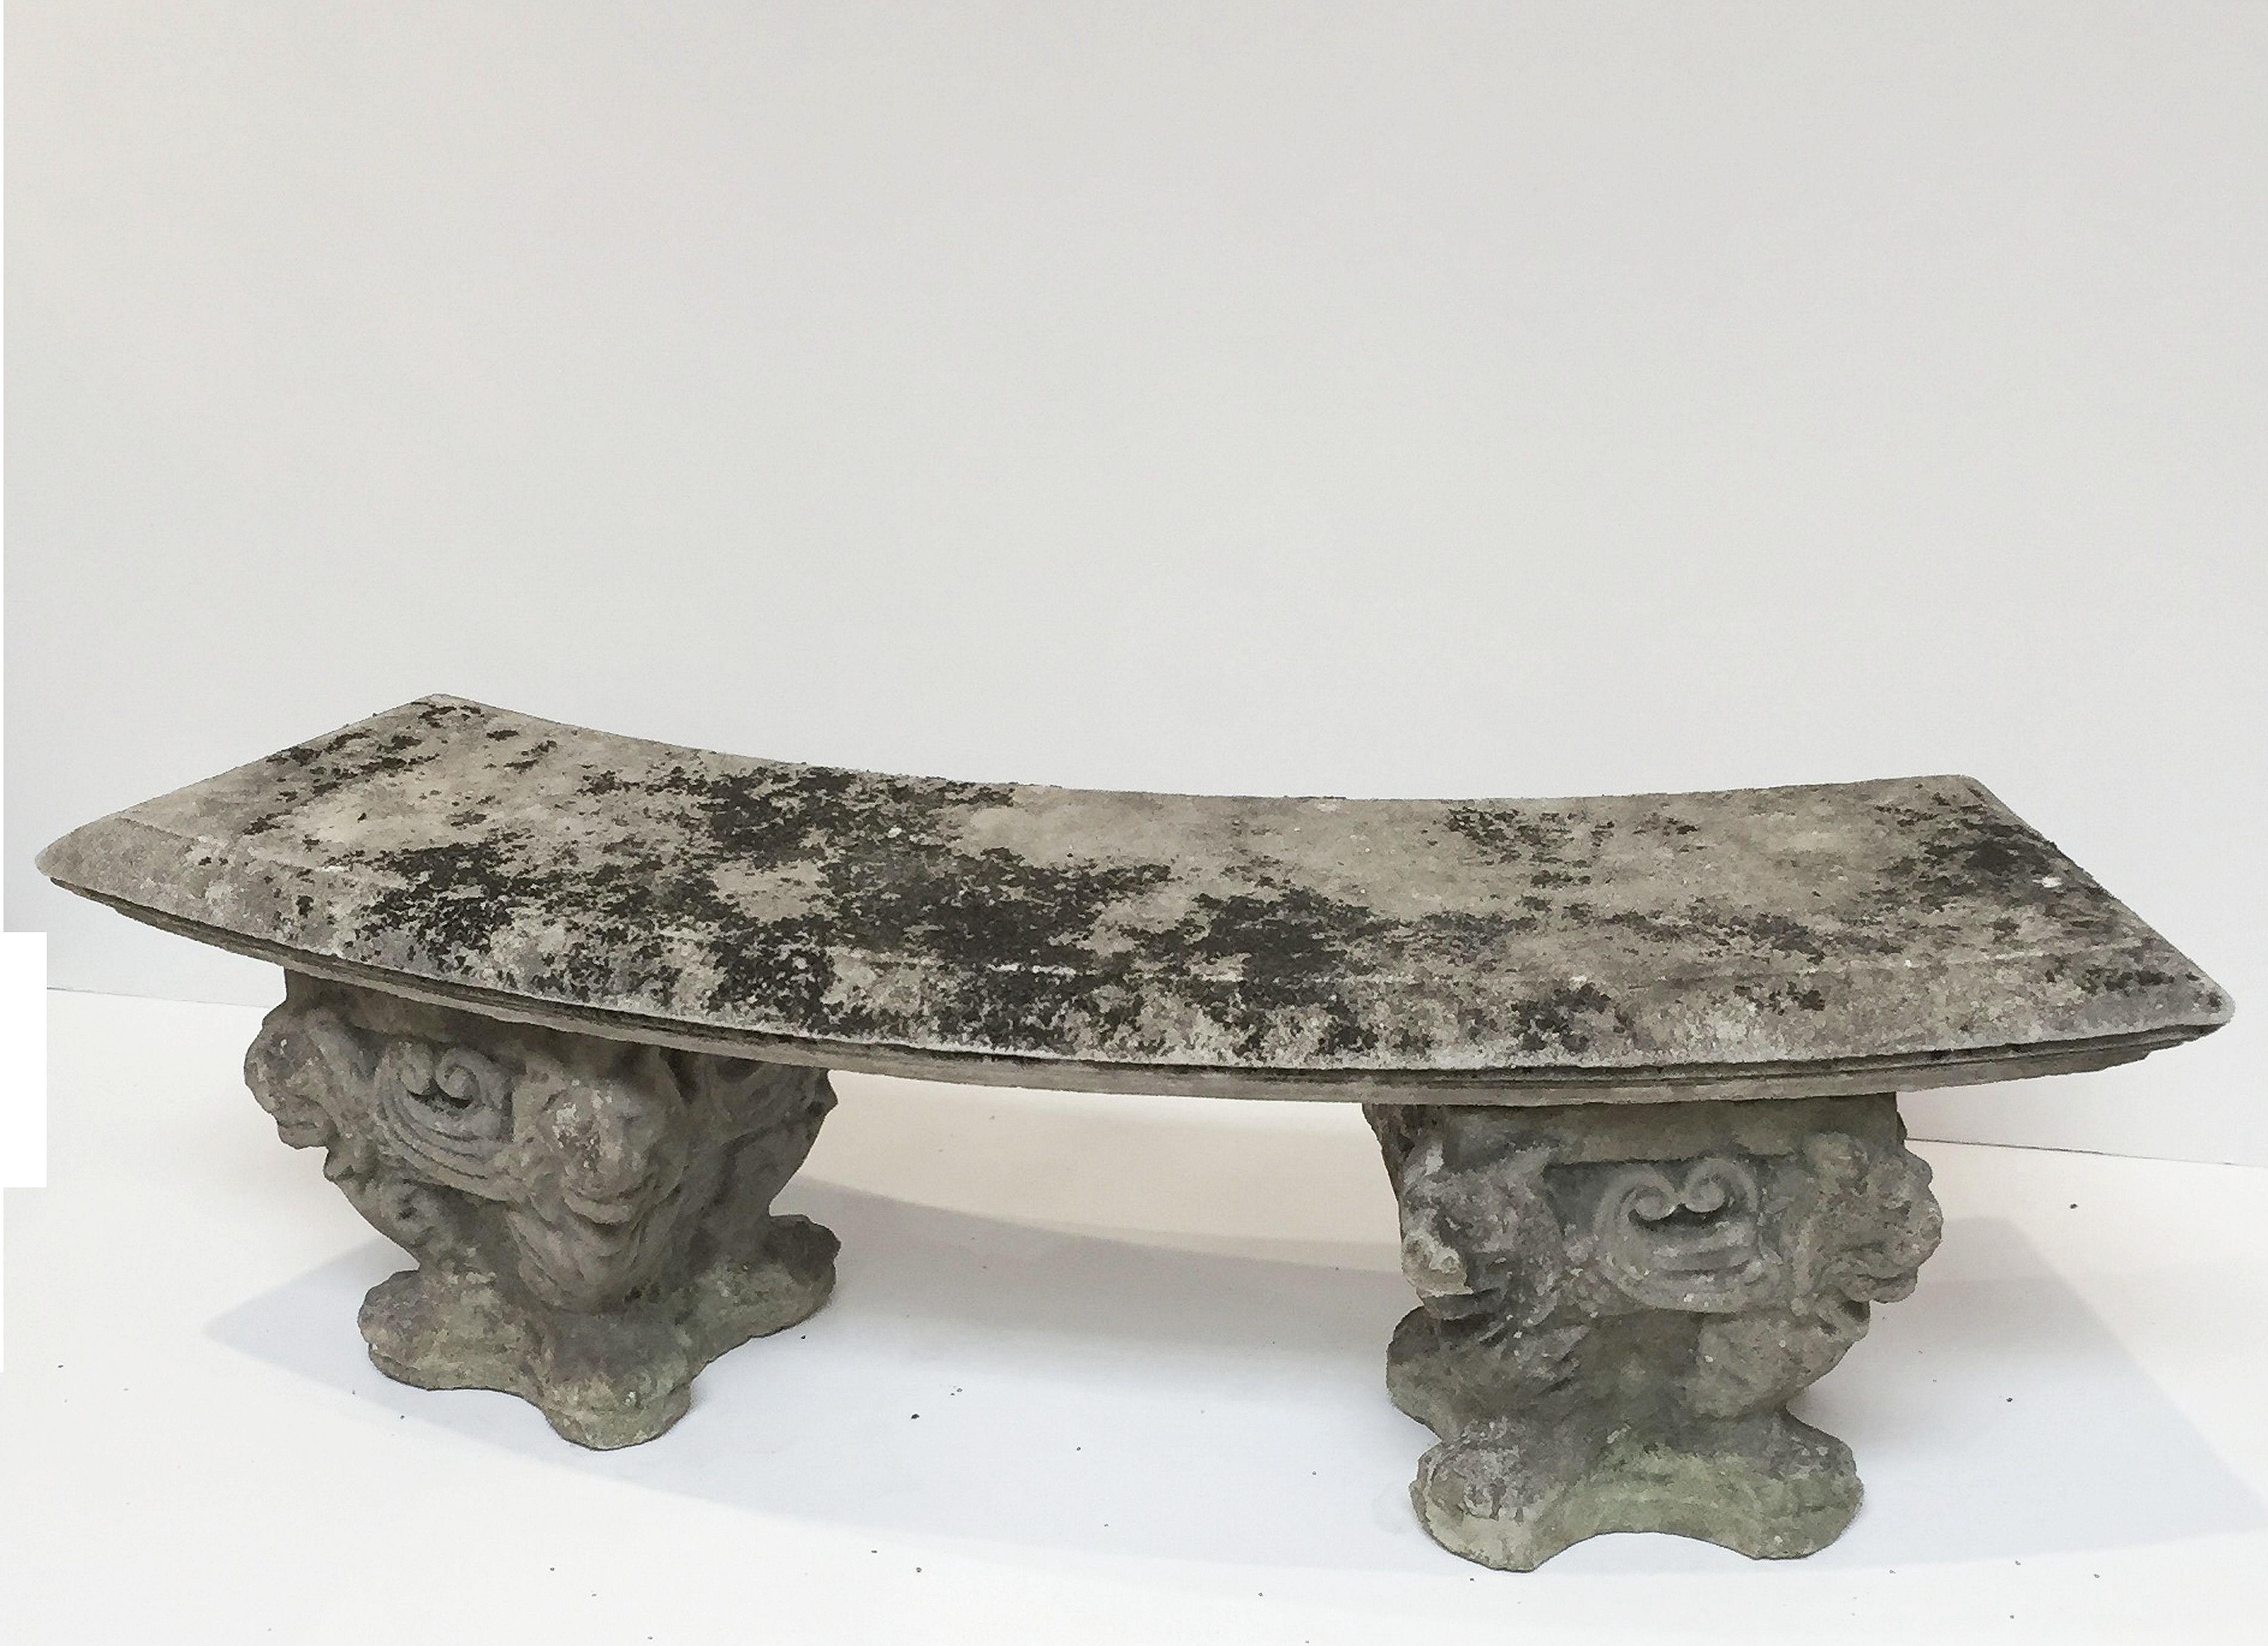 A fine English large garden bench or seat of composition stone, featuring a curved top (59 inches length), set upon two plinth supports with a lion and scroll design.

Great for an indoor or outdoor garden, garden room, or conservatory!